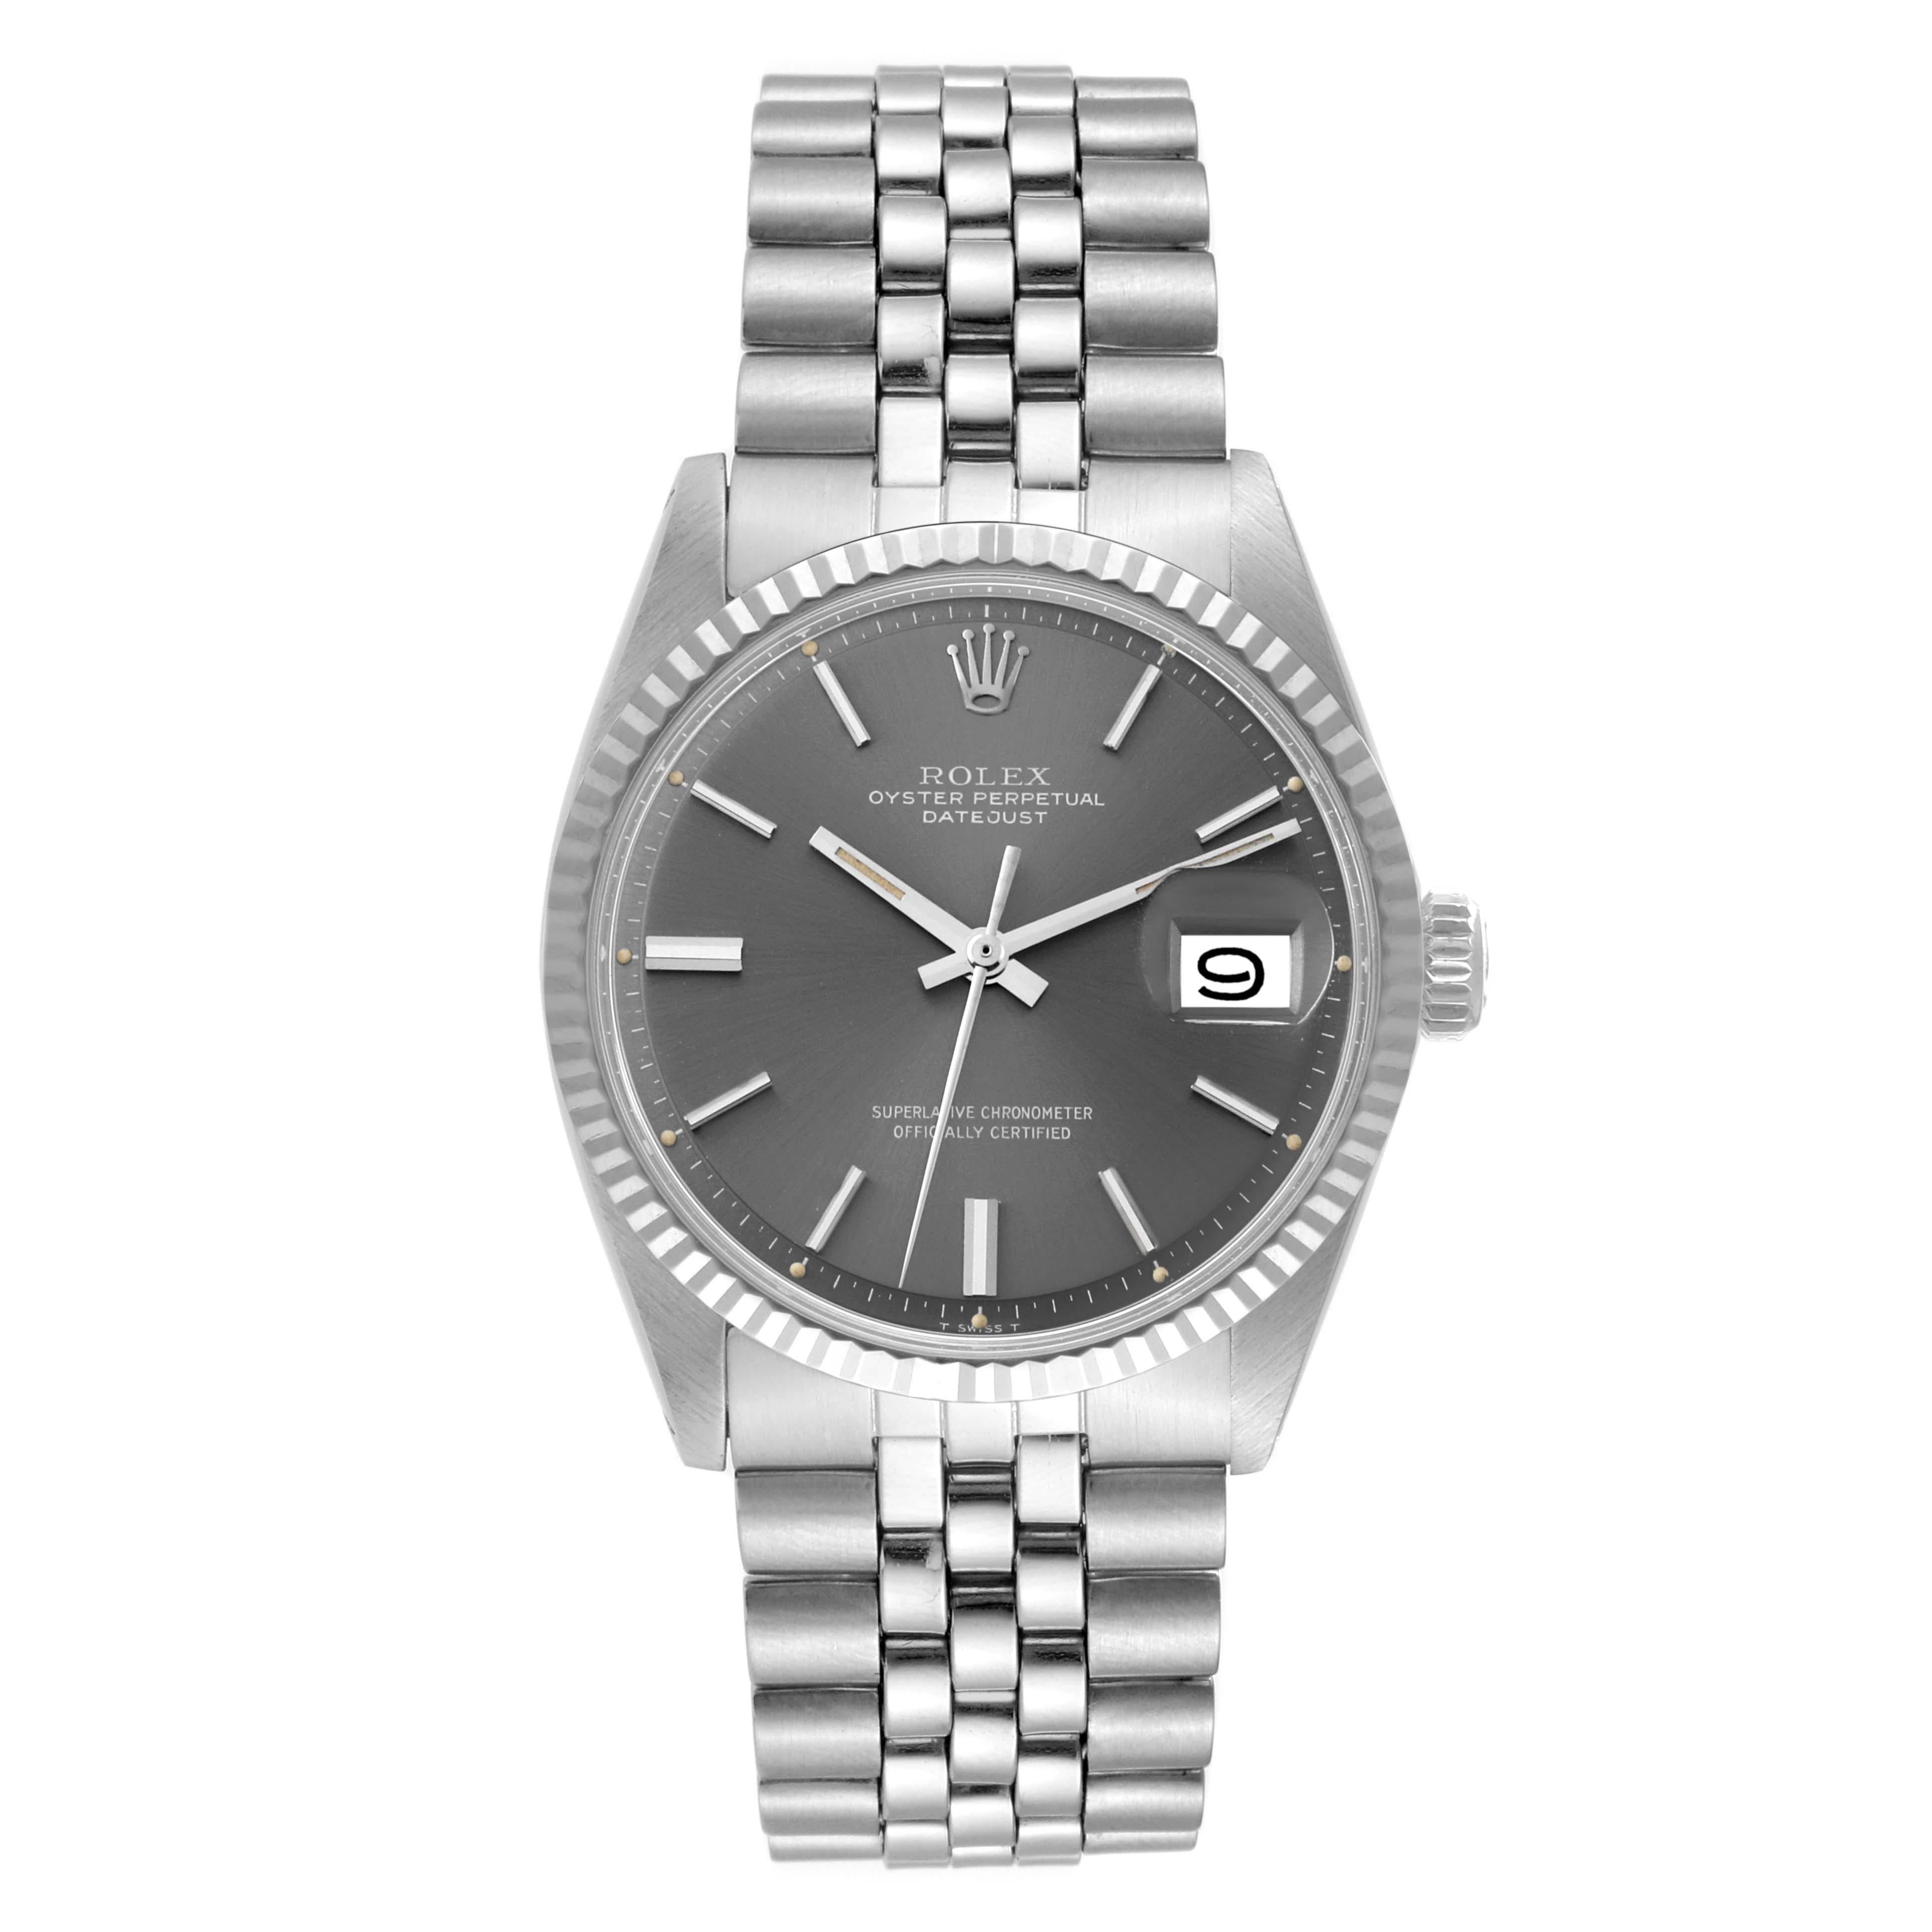 Rolex Datejust Steel White Gold Silver Grey Dial Vintage Mens Watch 1601. Officially certified chronometer automatic self-winding movement. Stainless steel oyster case 36 mm in diameter. Rolex logo on the crown. 18k white gold fluted bezel. Acrylic